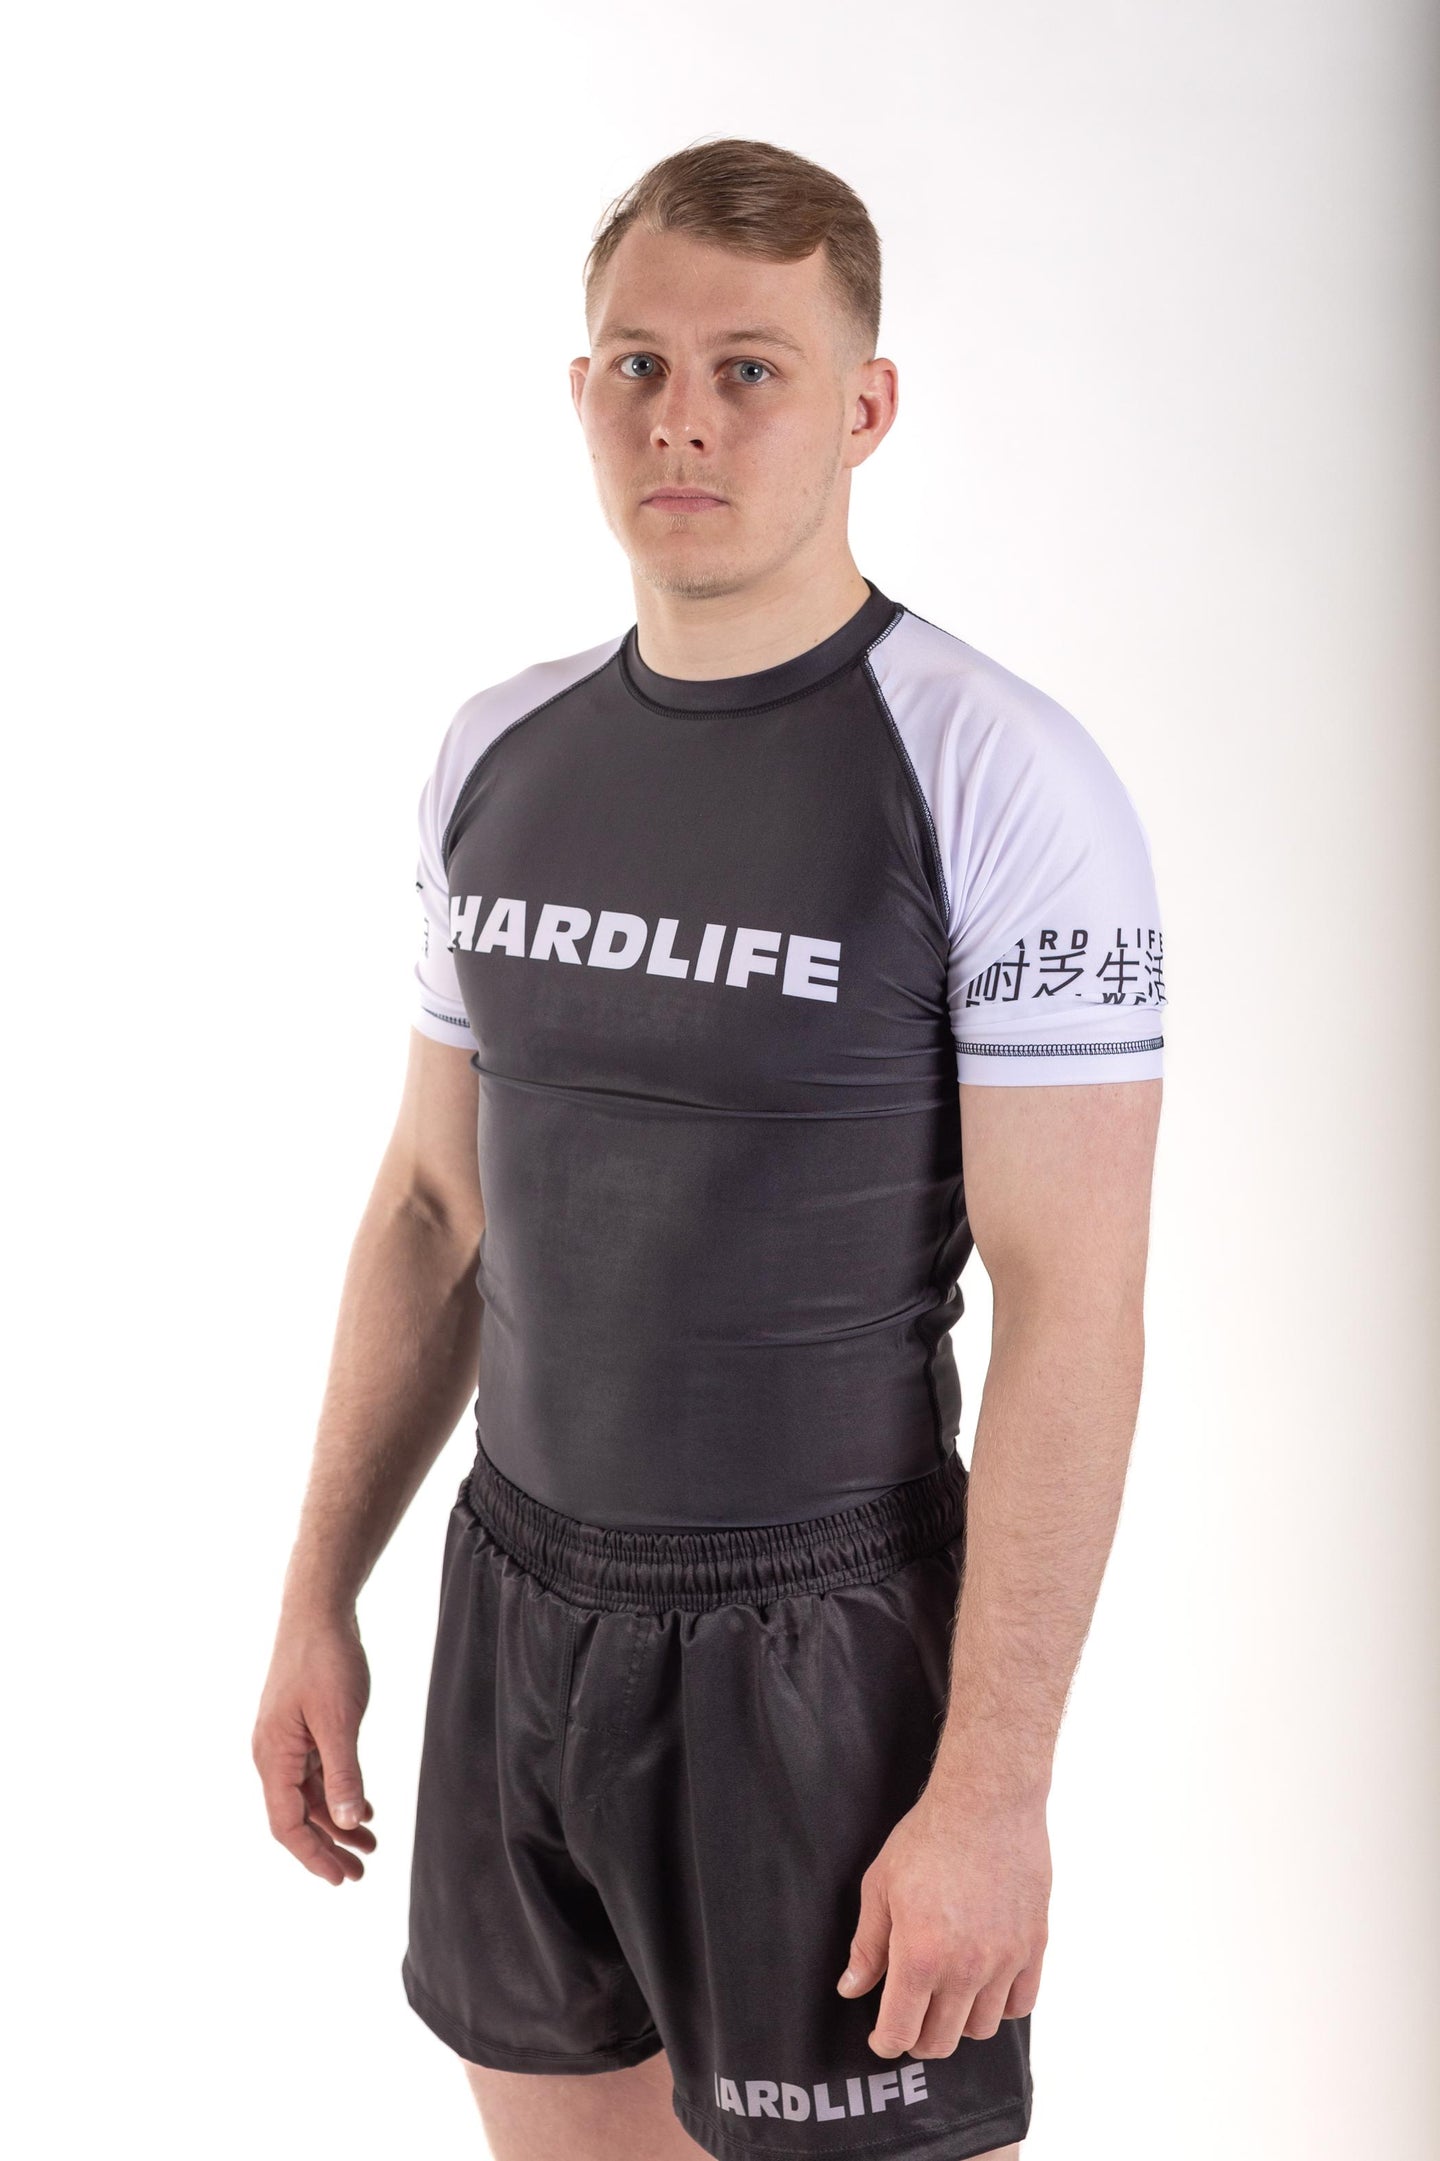 Image of Adults Ranked IBJJF Rashguards - adults-ranked-ibjjf-rashguards: <p class="MsoNormal">Catering to the dedicated practitioner, the Men's Hardlife Rashguard is your ultimate companion for training and competition